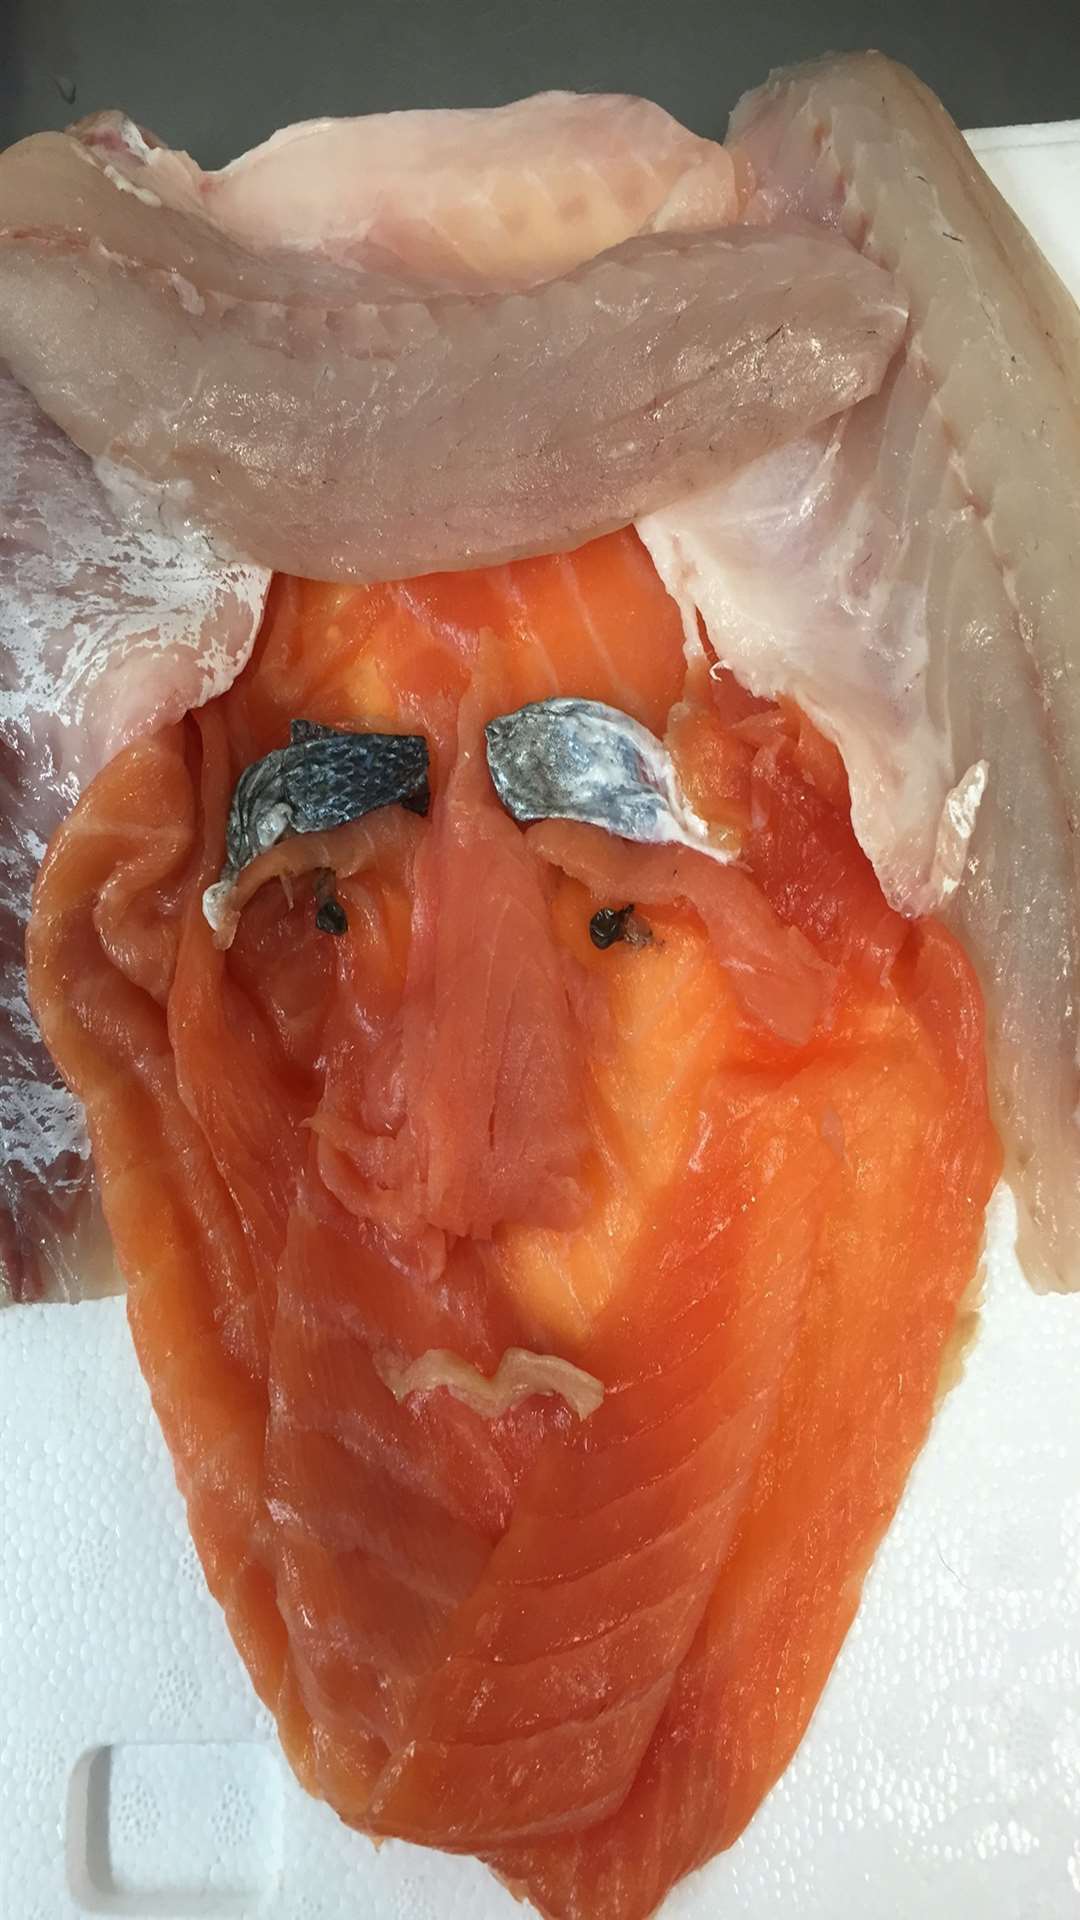 Trump's hair was made out of sea bass and his face out of smoked salmon